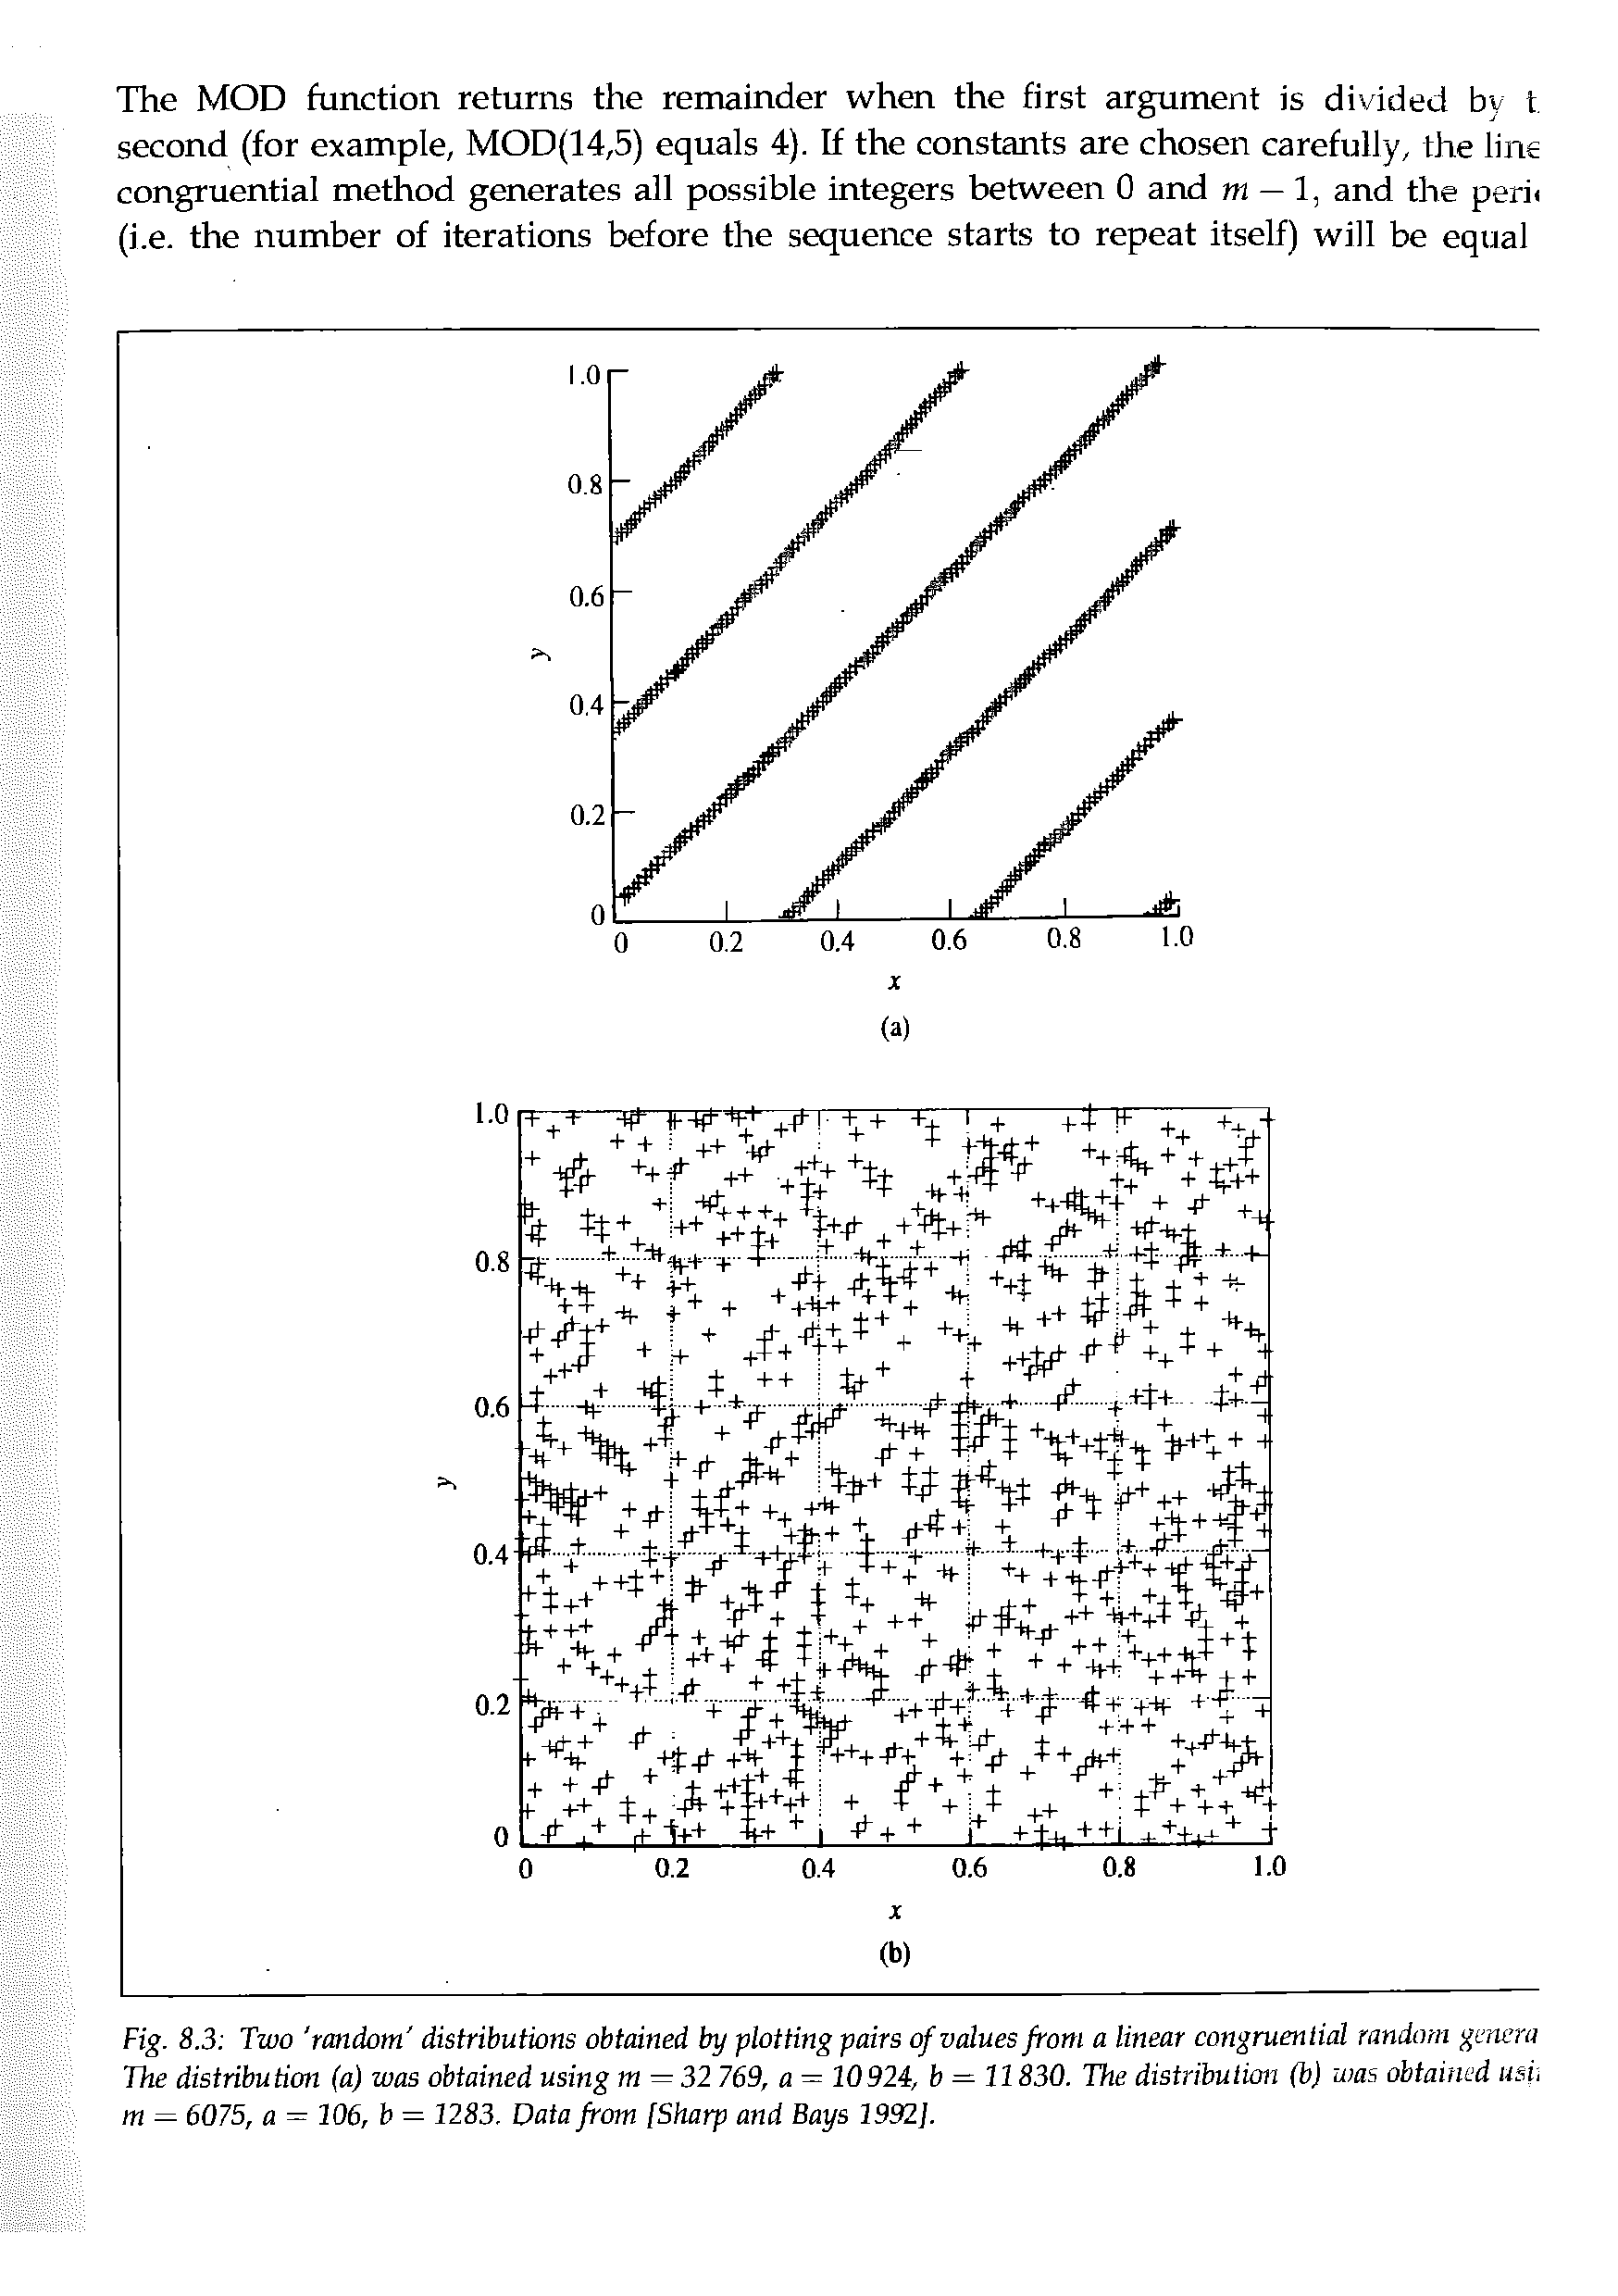 Fig. 8.3 Two random distributions obtained by plotting pairs of values from a linear congruential random genera The distribution (a) was obtained using m—32 769, a = 10924, b = 11830. The distribution (bj was obtained usi, m = 6075, a = 106, b = 1283. Data from [Sharp and Bays 1992].